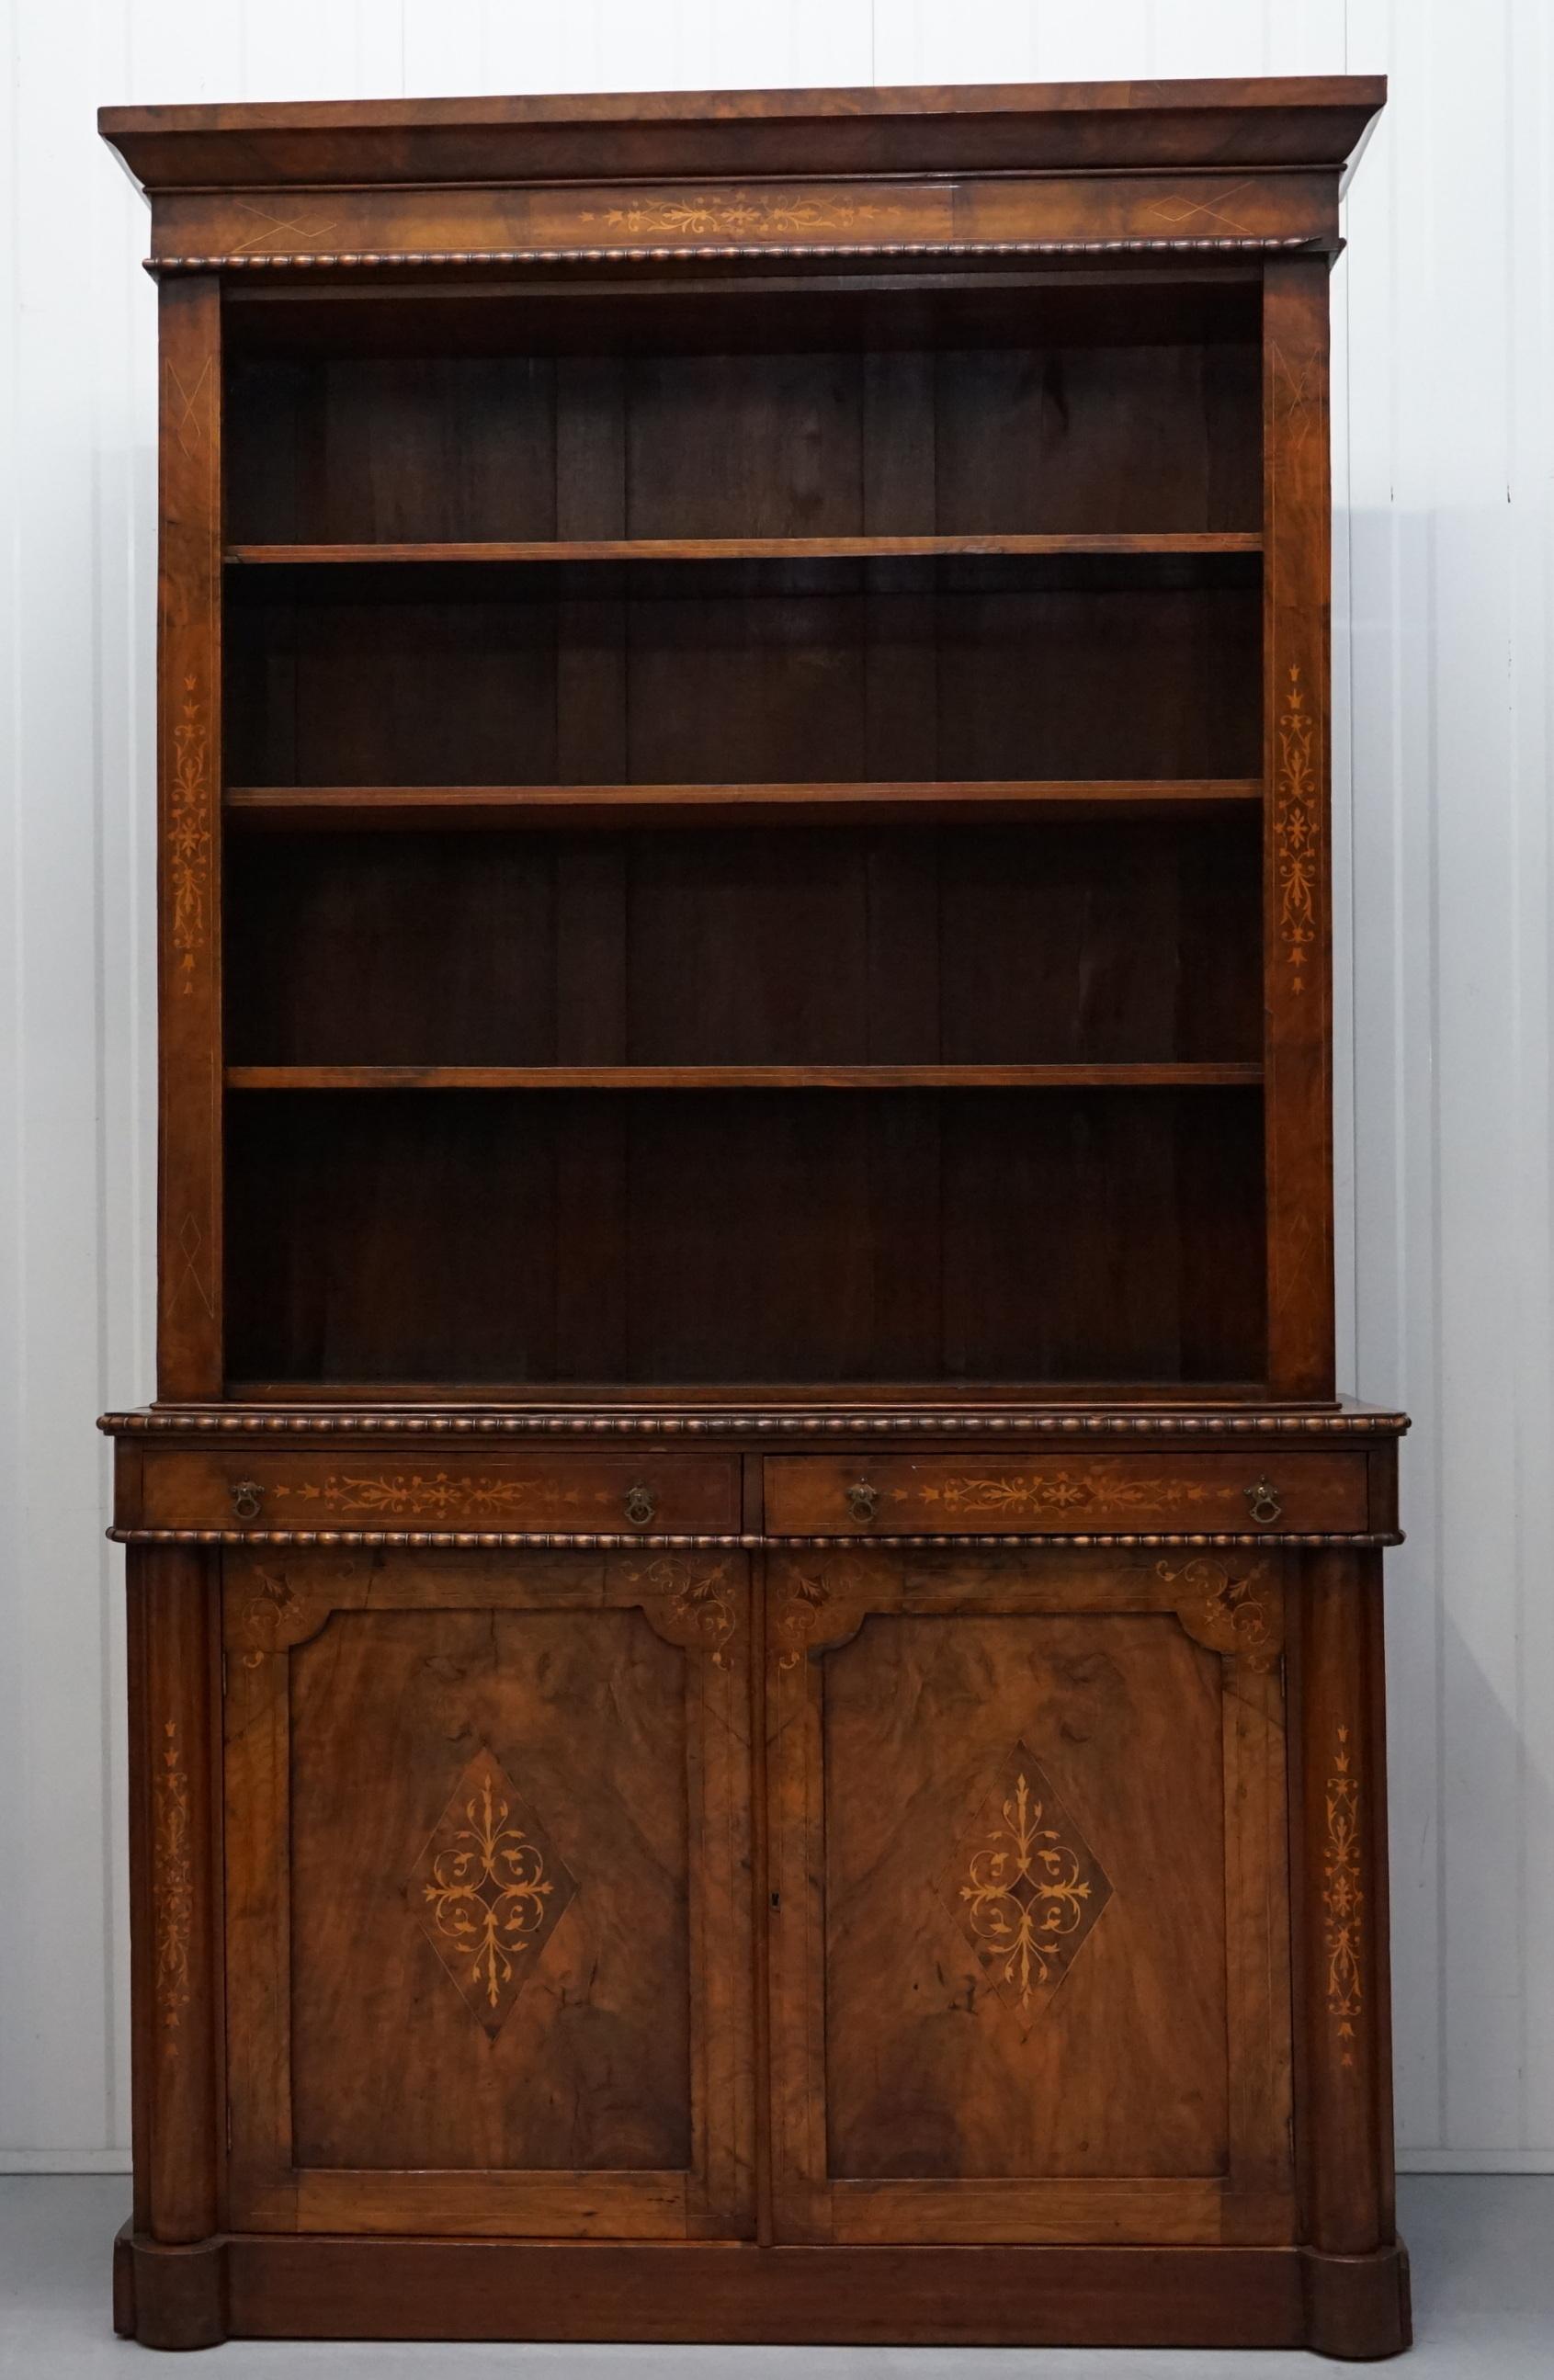 We are delighted to offer for sale this beautiful early Victorian Redwood with Marquetry inlay Library bookcase with Pugin style handles

A very good looking and grand functional piece of furniture, the timber patina is to die for as is the